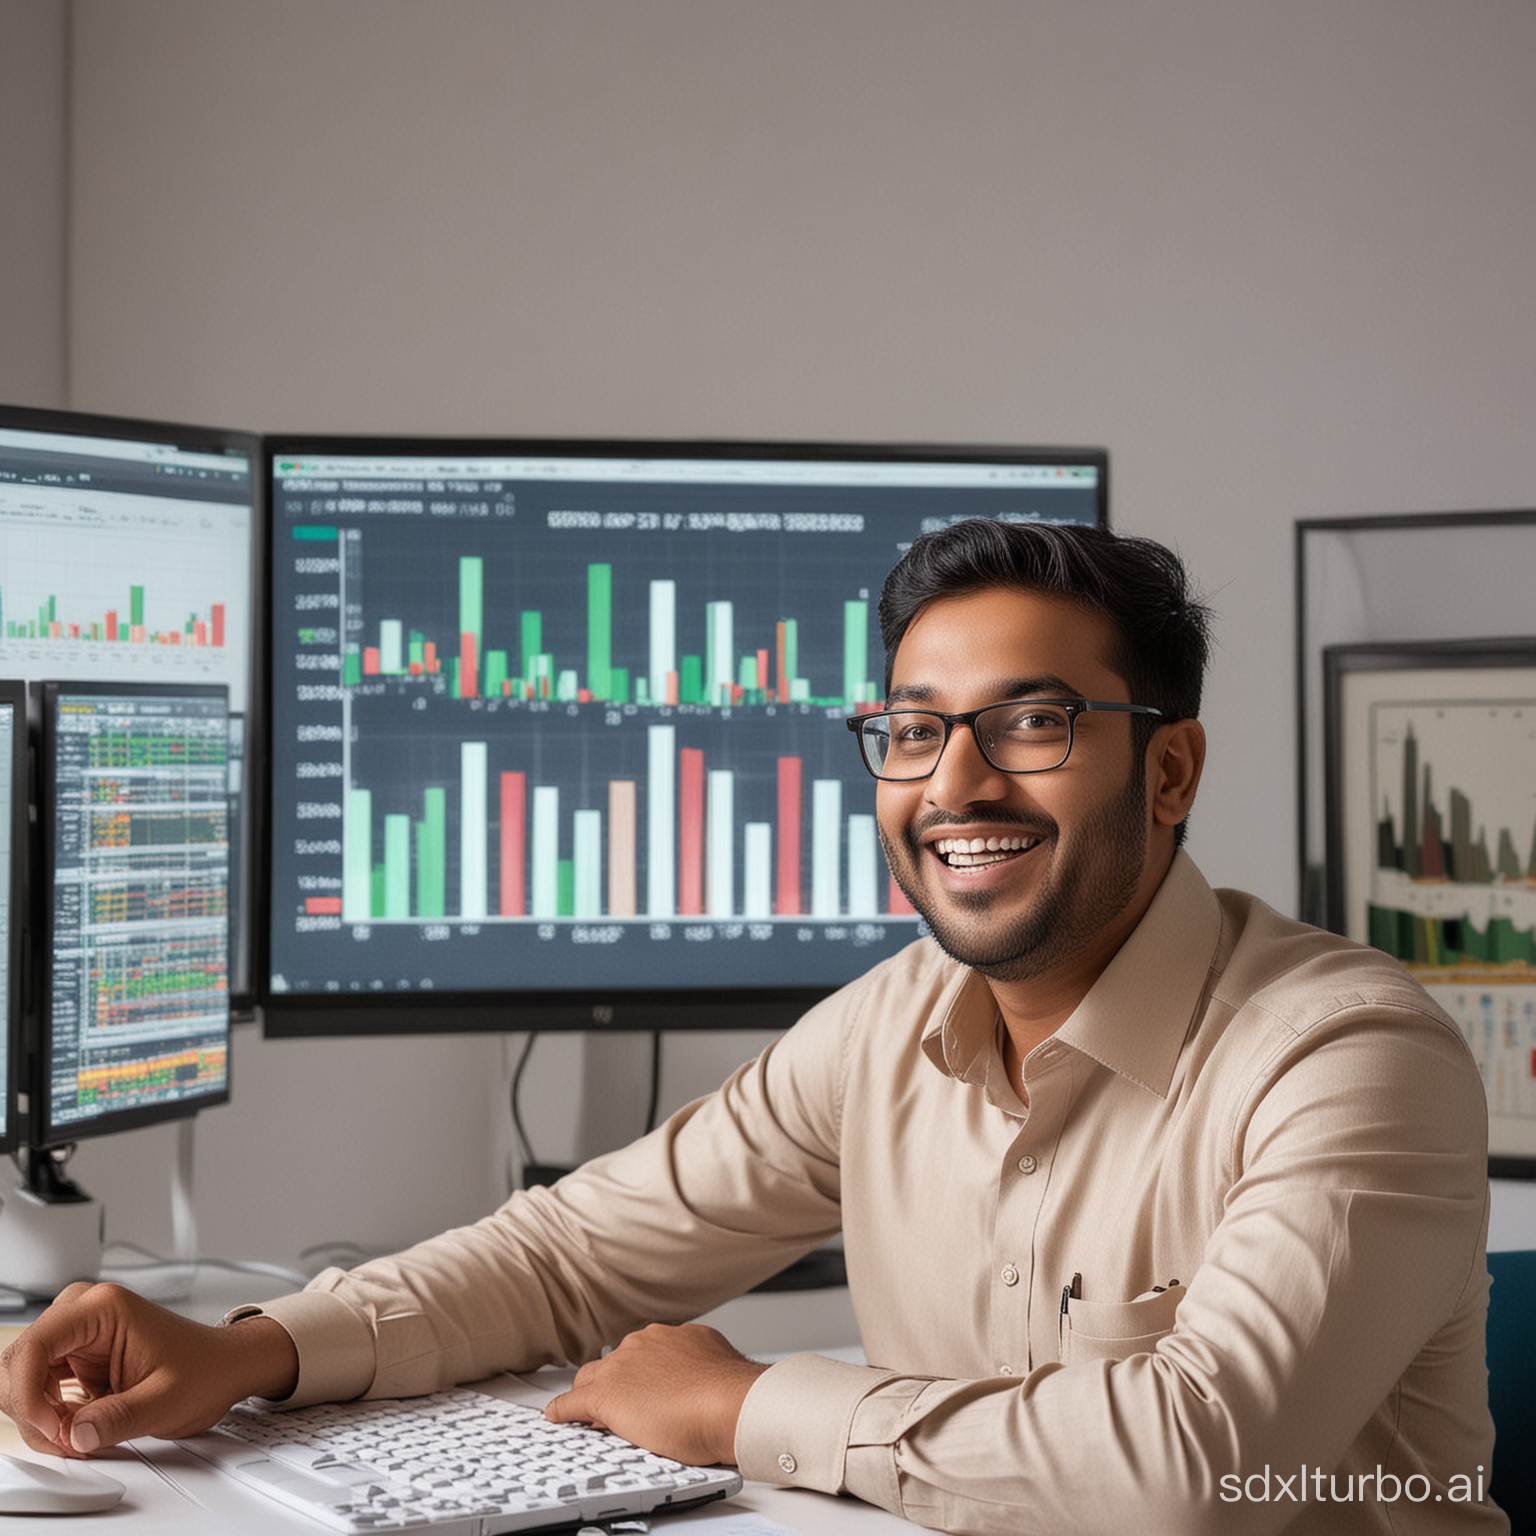 An Indian financial engineer is happy to share the joy of investing successfully in stocks. In the background is a computer showing the movement of a candlestick chart.